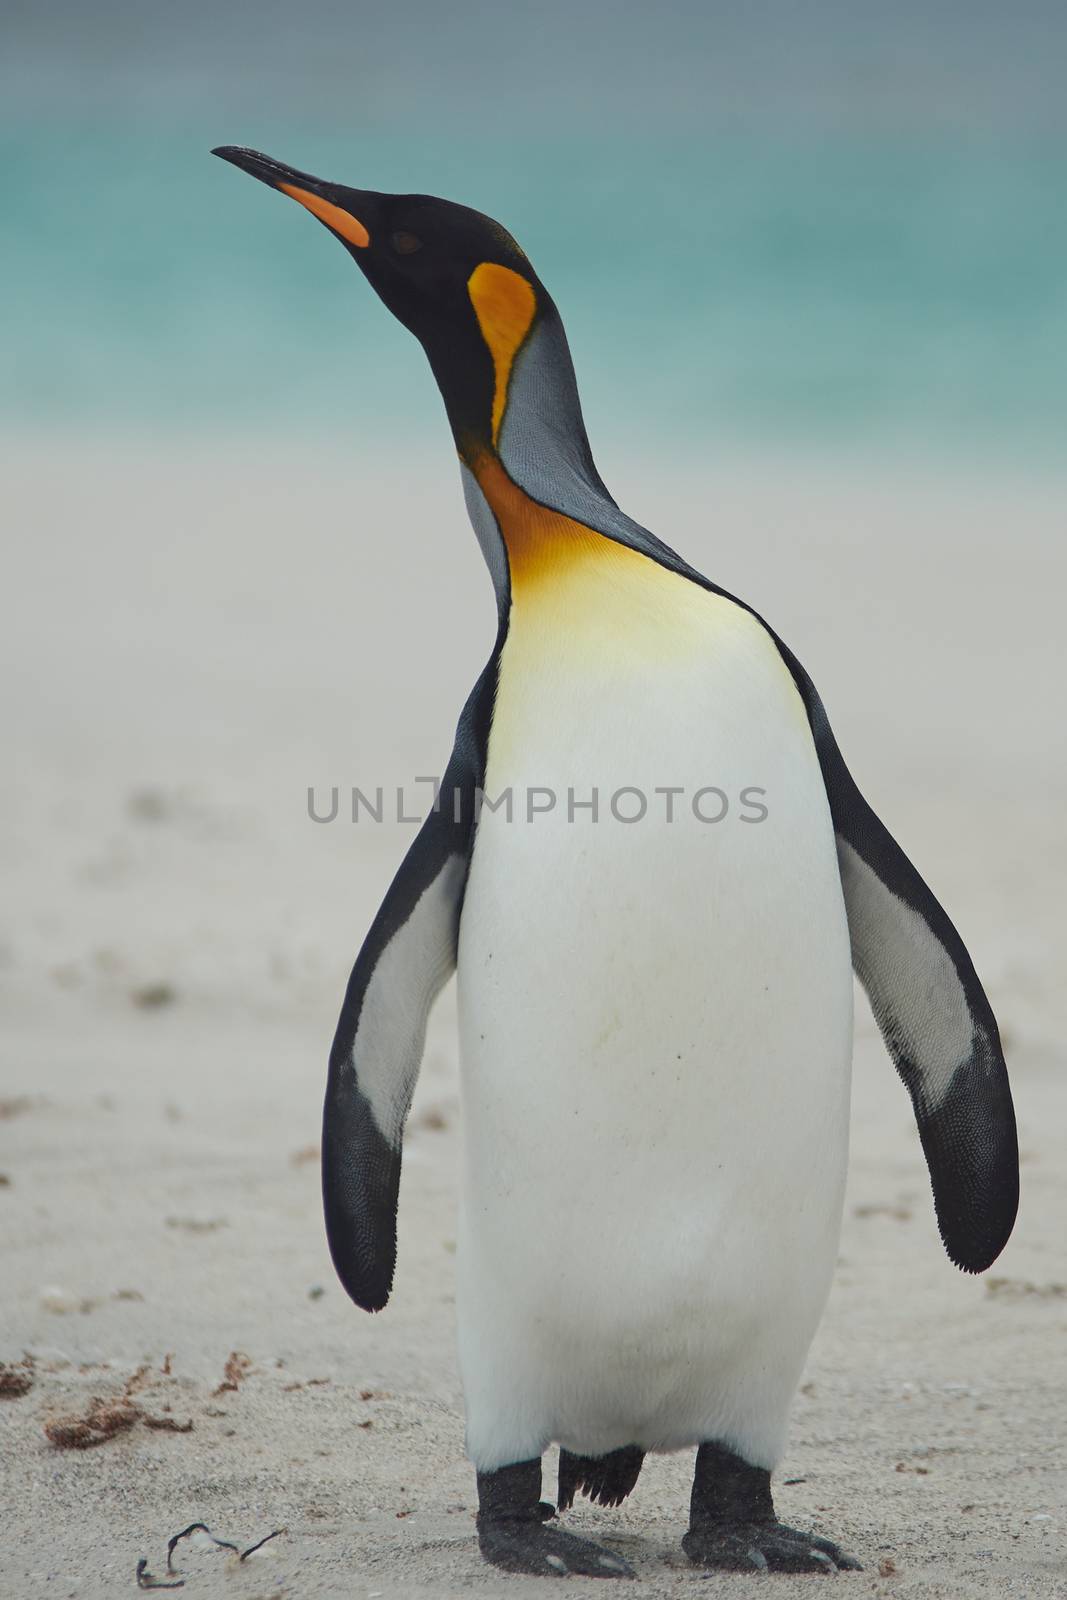 King Penguin (Aptenodytes patagonicus) walking along the beach of Sandy Bay on Bleaker Island in the Falkland Islands.